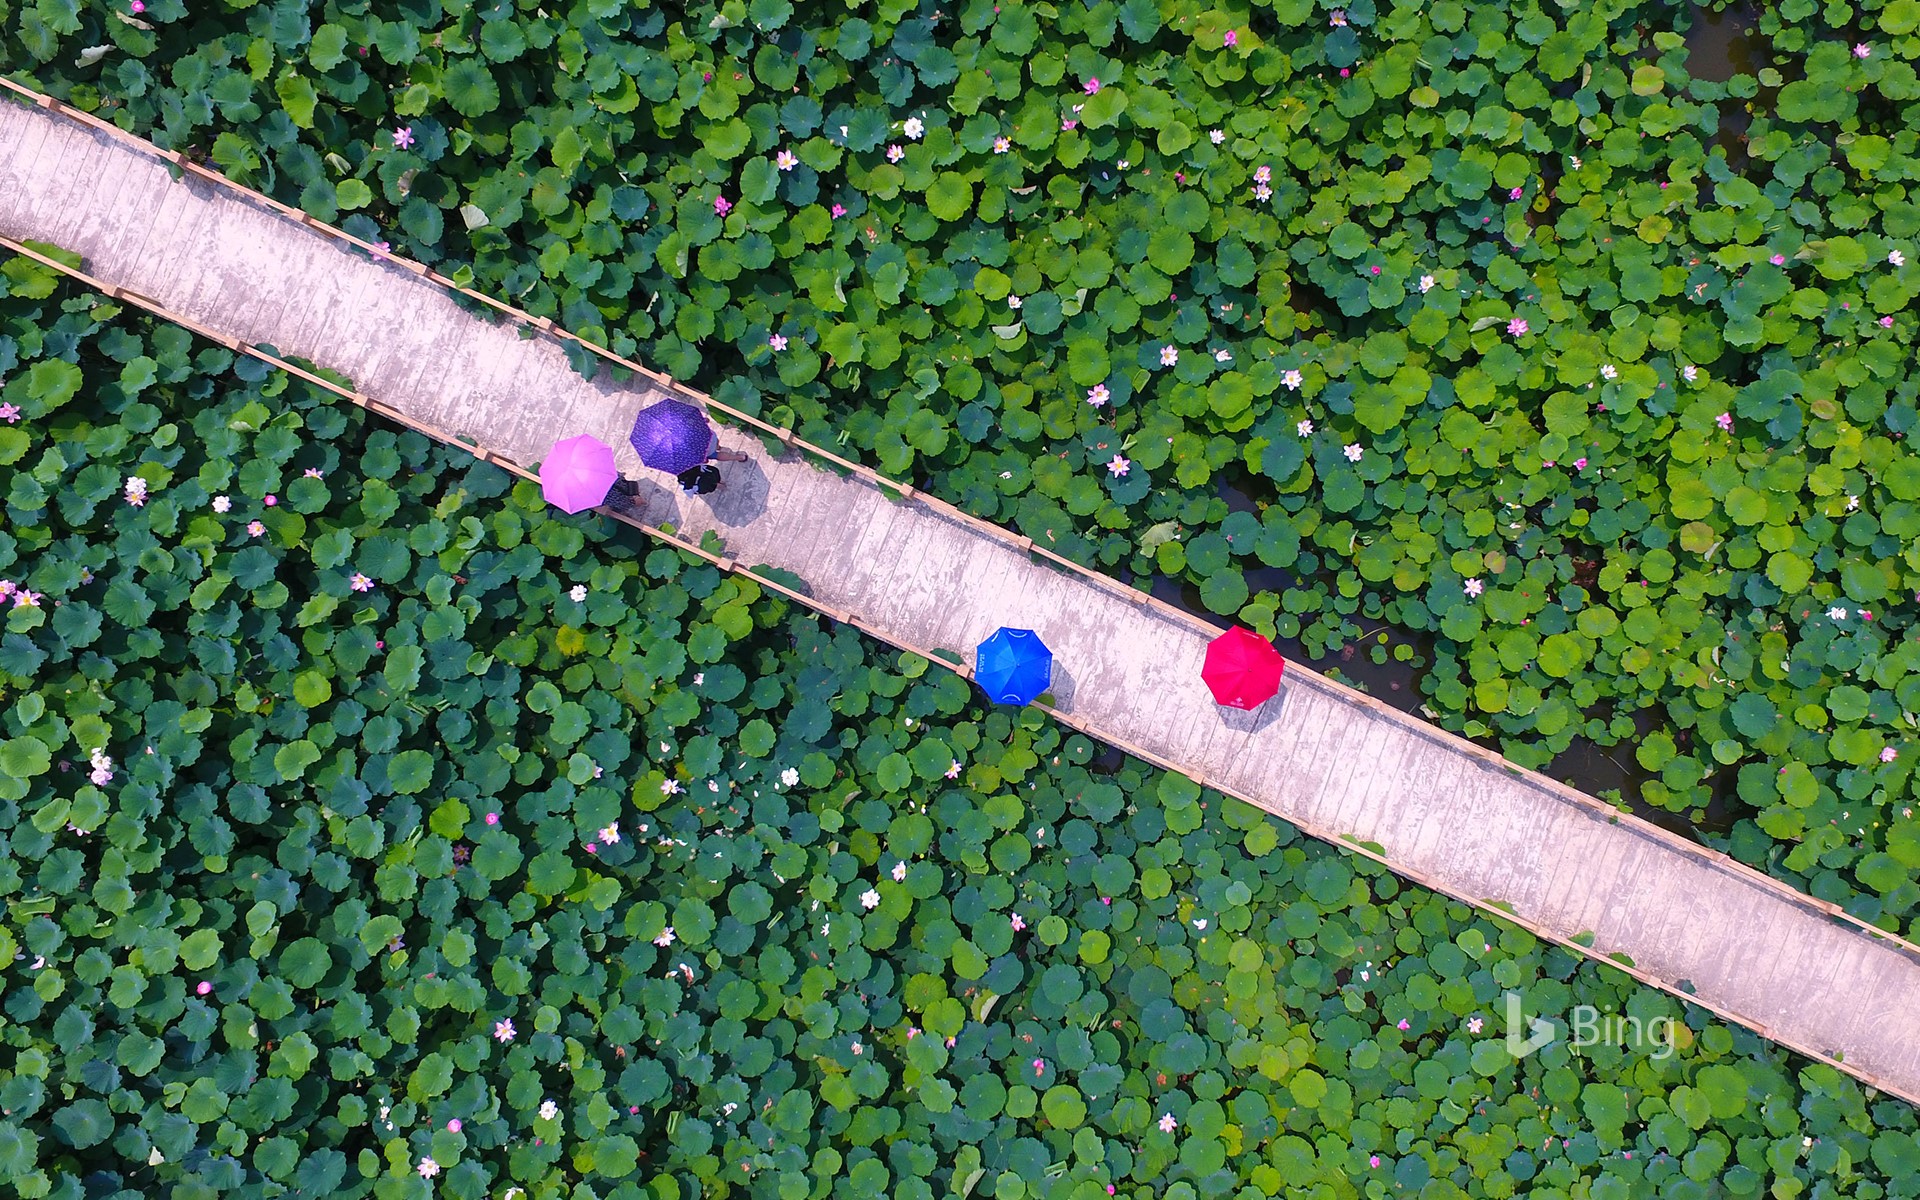 [Small Summer Today] Tourists watch lotus flowers at Yunhe Wetland Park in Taierzhuang District, Zaozhuang, Shandong, China